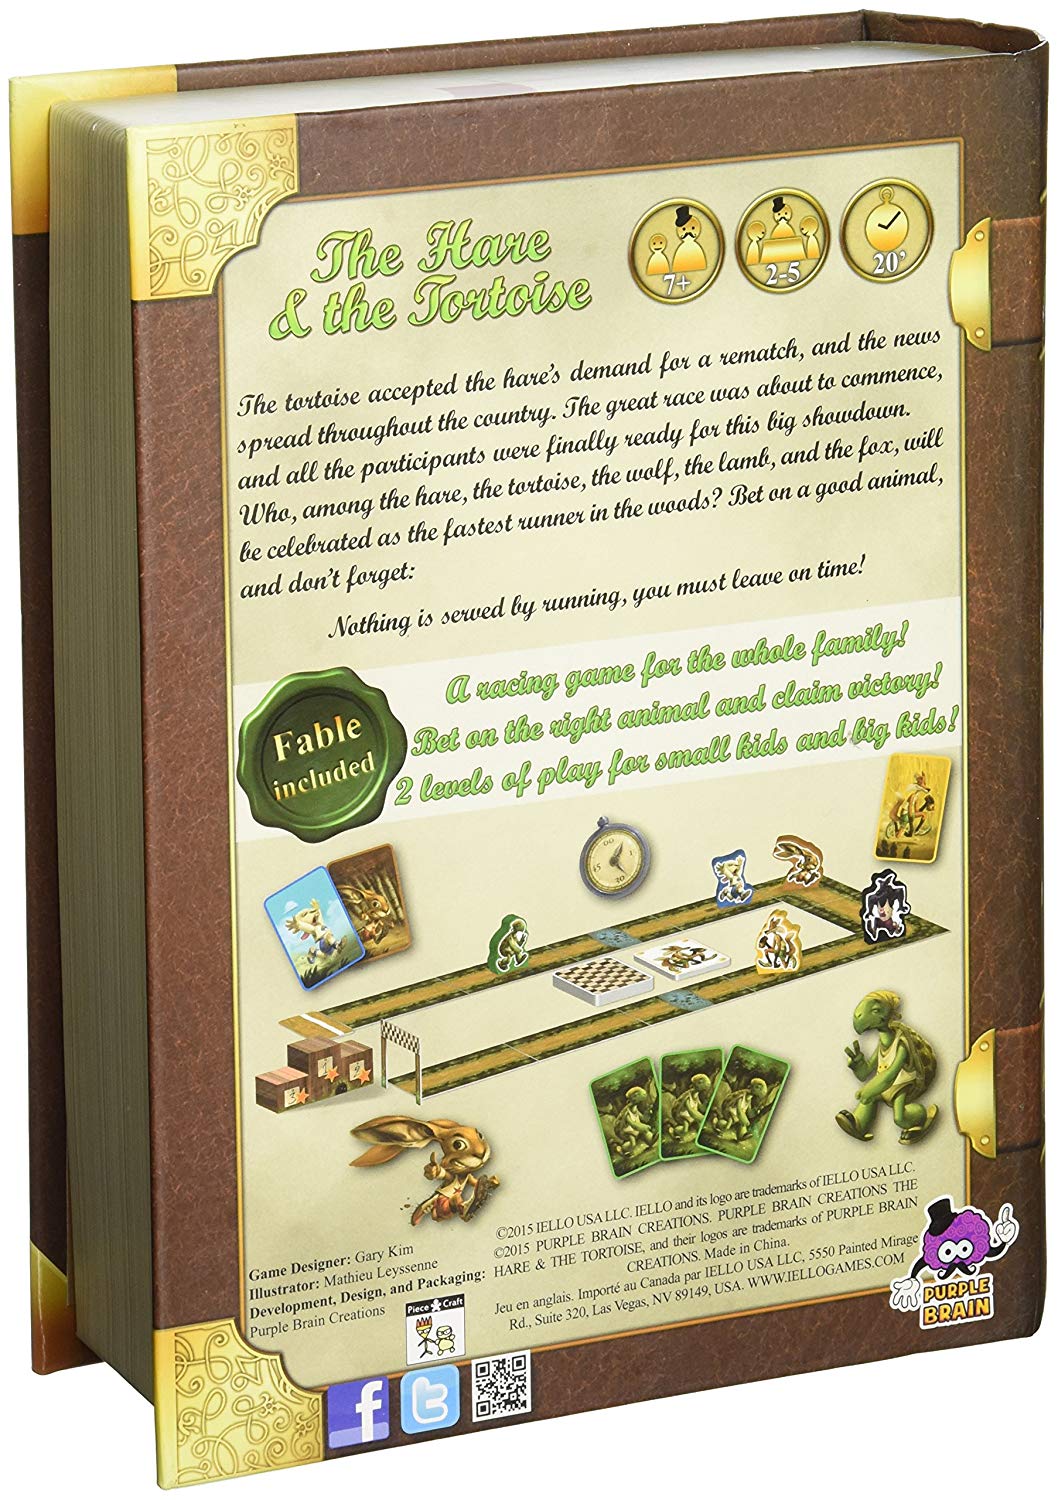 Tales & Games: The Hare & the Tortoise | Kessel Run Games Inc. 